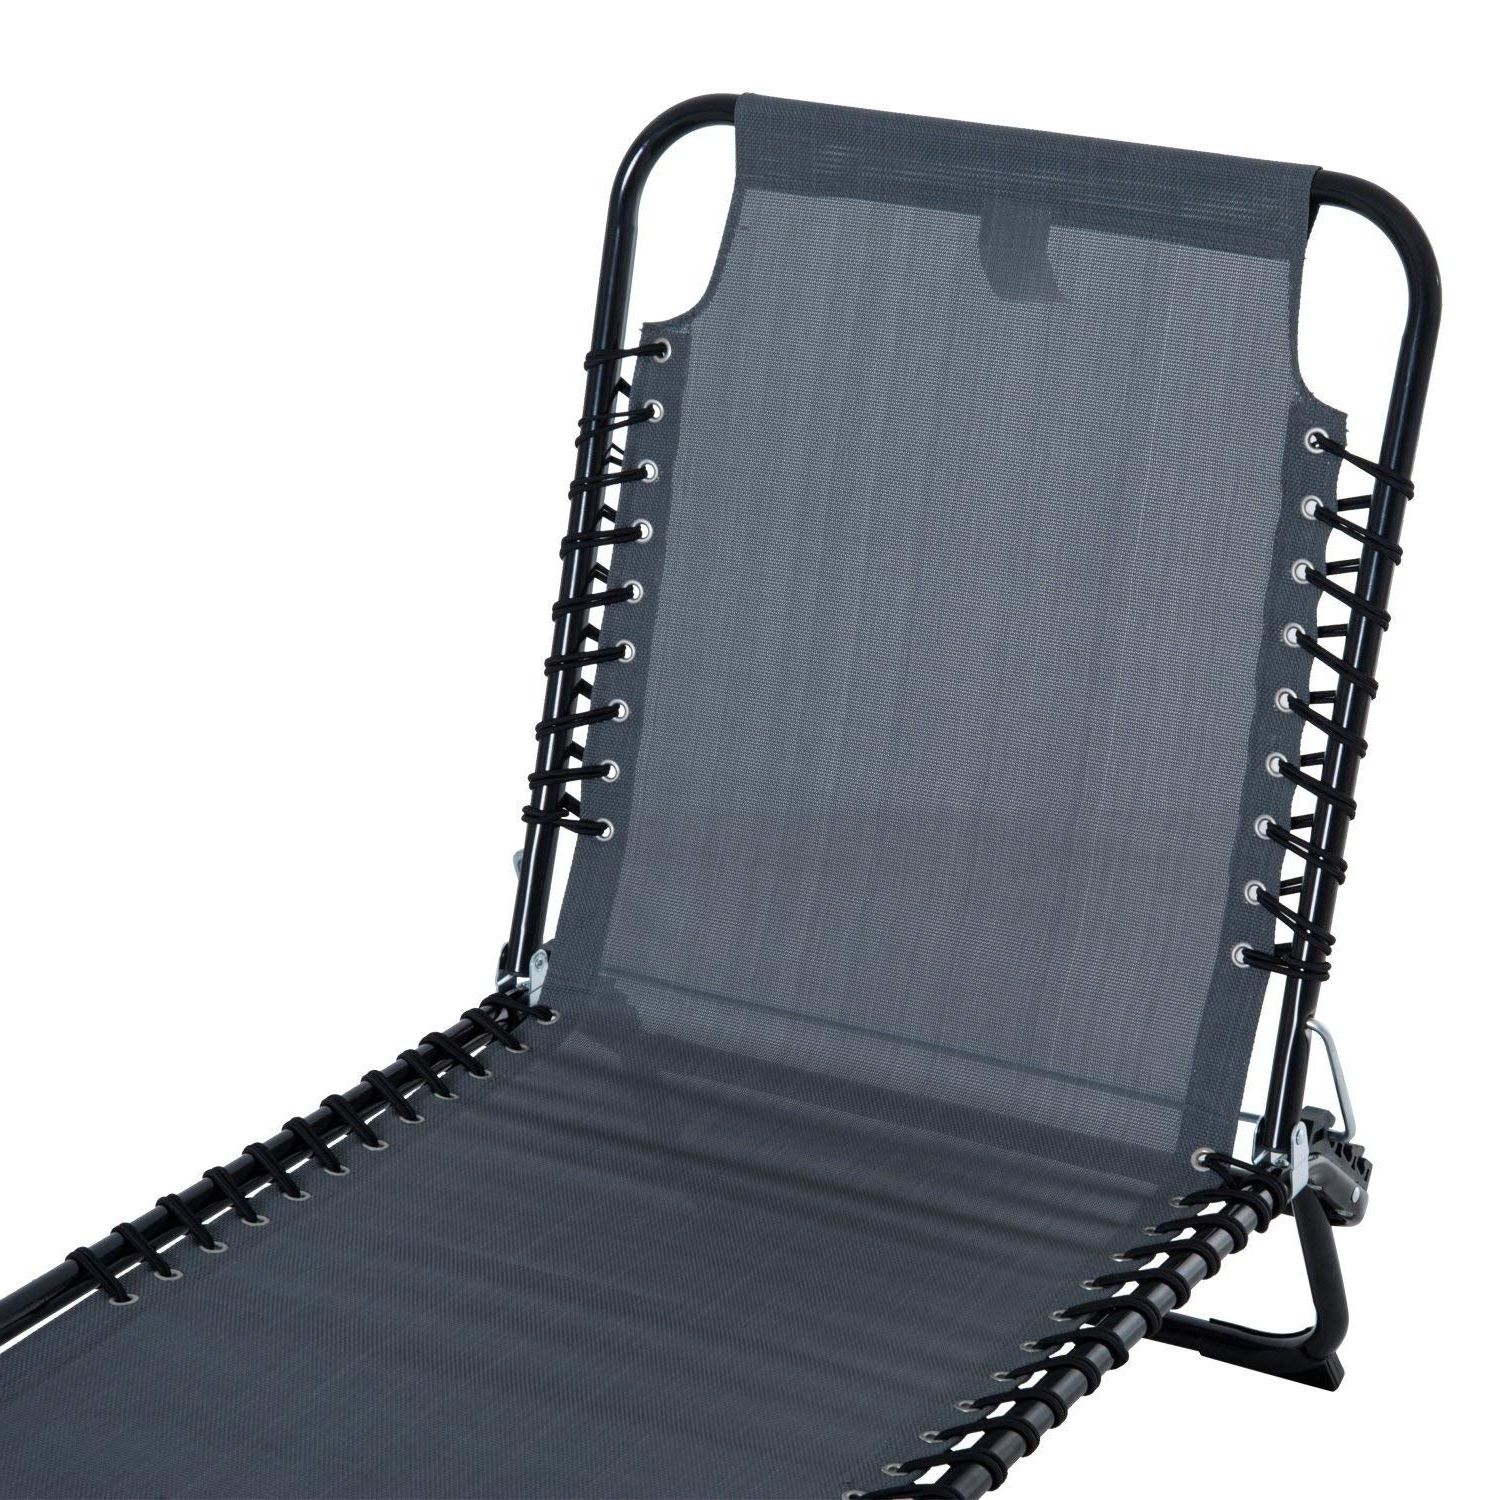 Popular Outsunny 3 Position Portable Reclining Beach Chaise Lounge Folding Chair  Outdoor Patio – Grey Inside 3 Position Portable Folding Reclining Beach Chaise Lounges (View 6 of 25)